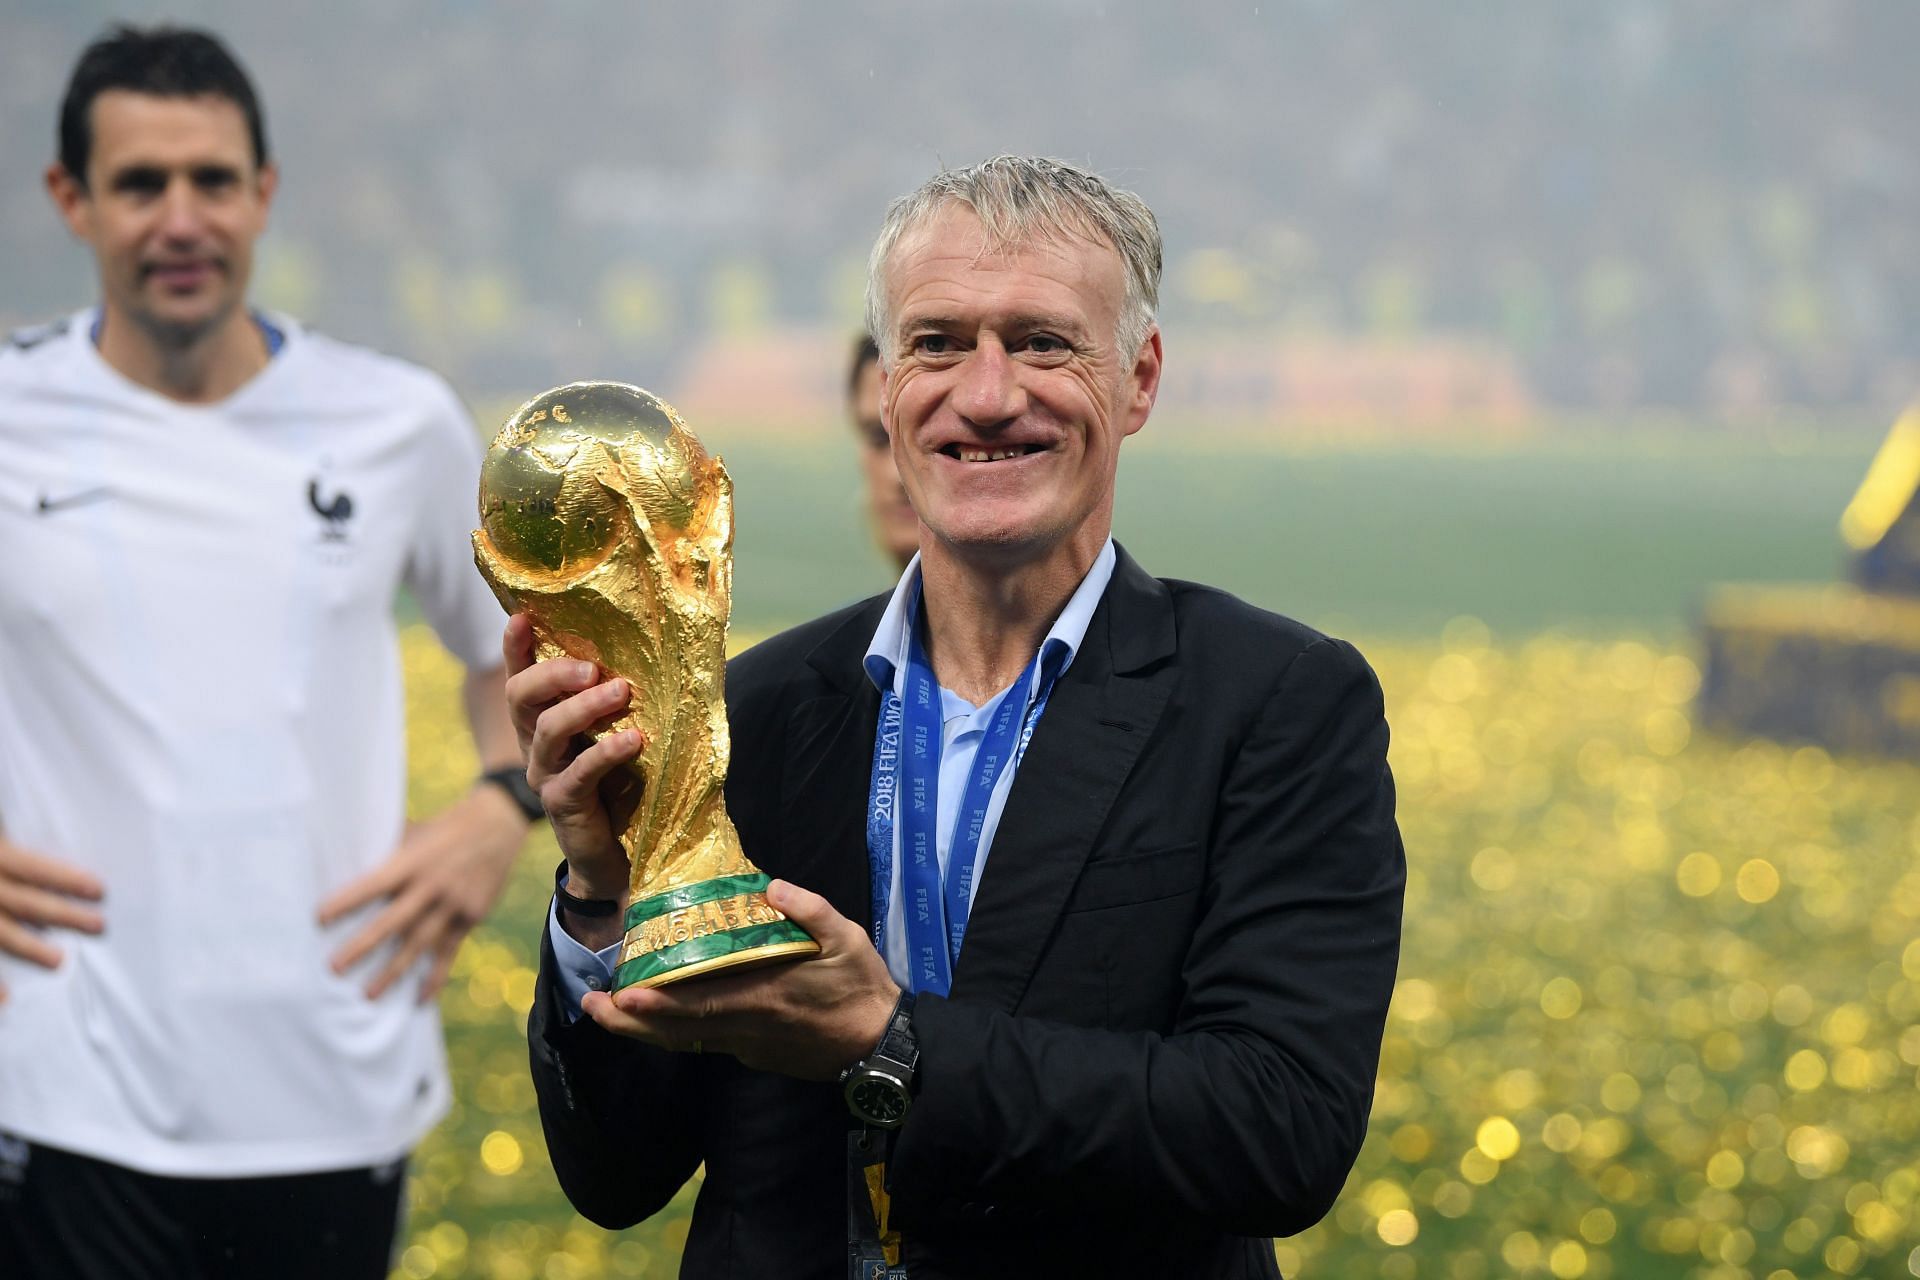 Didier Deschamps has won the FIFA World Cup as both player and manager.